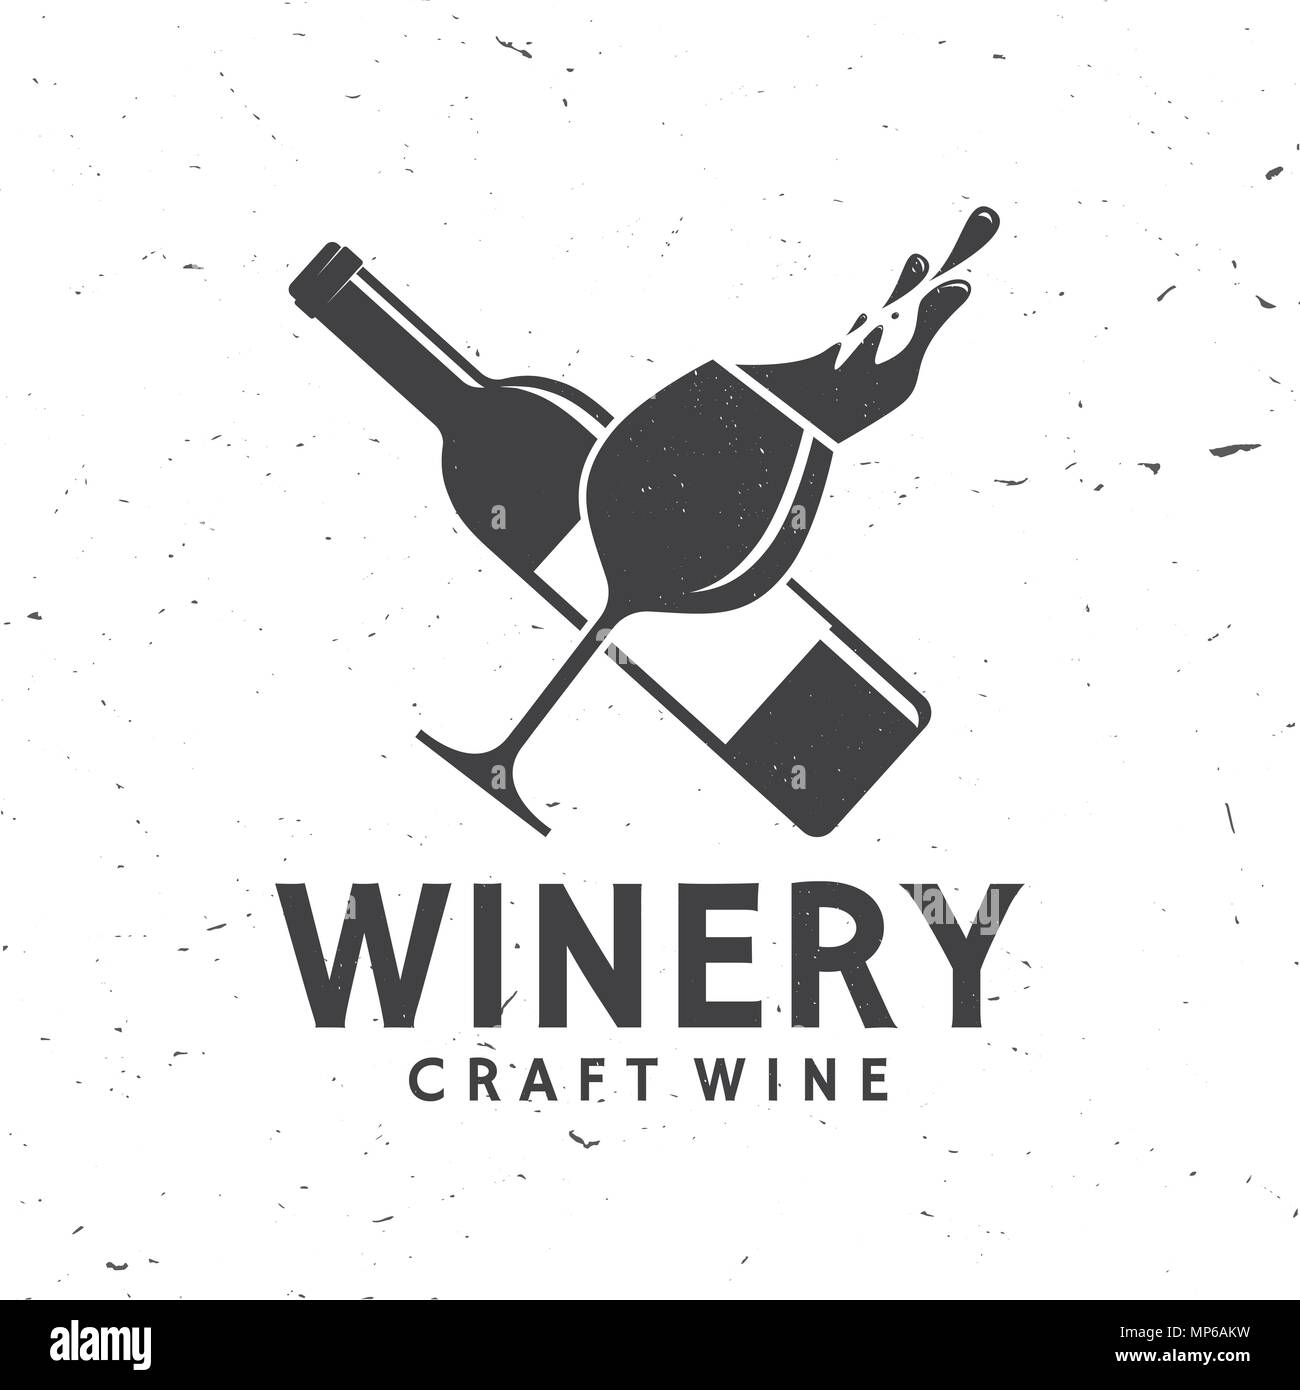 Craft wine. Winery company badge, sign or label. Vector illustration. Vintage design for winery company, bar, pub, shop, branding and restaurant business. Coaster for wine glasses Stock Vector